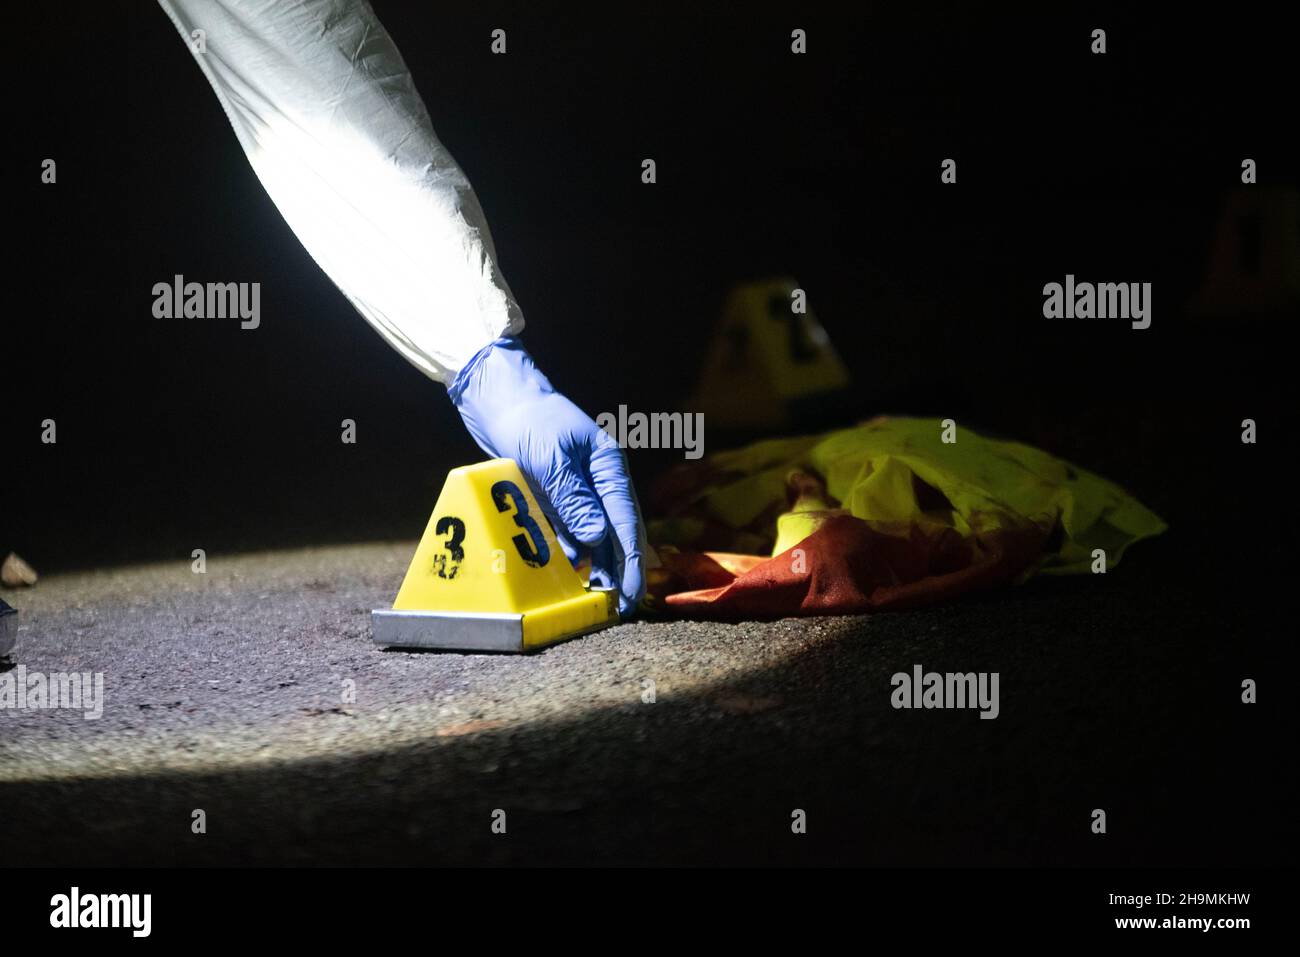 Forensics placing evidence marker number three by bloodied reflective vest, Birmingham, UK. Stock Photo